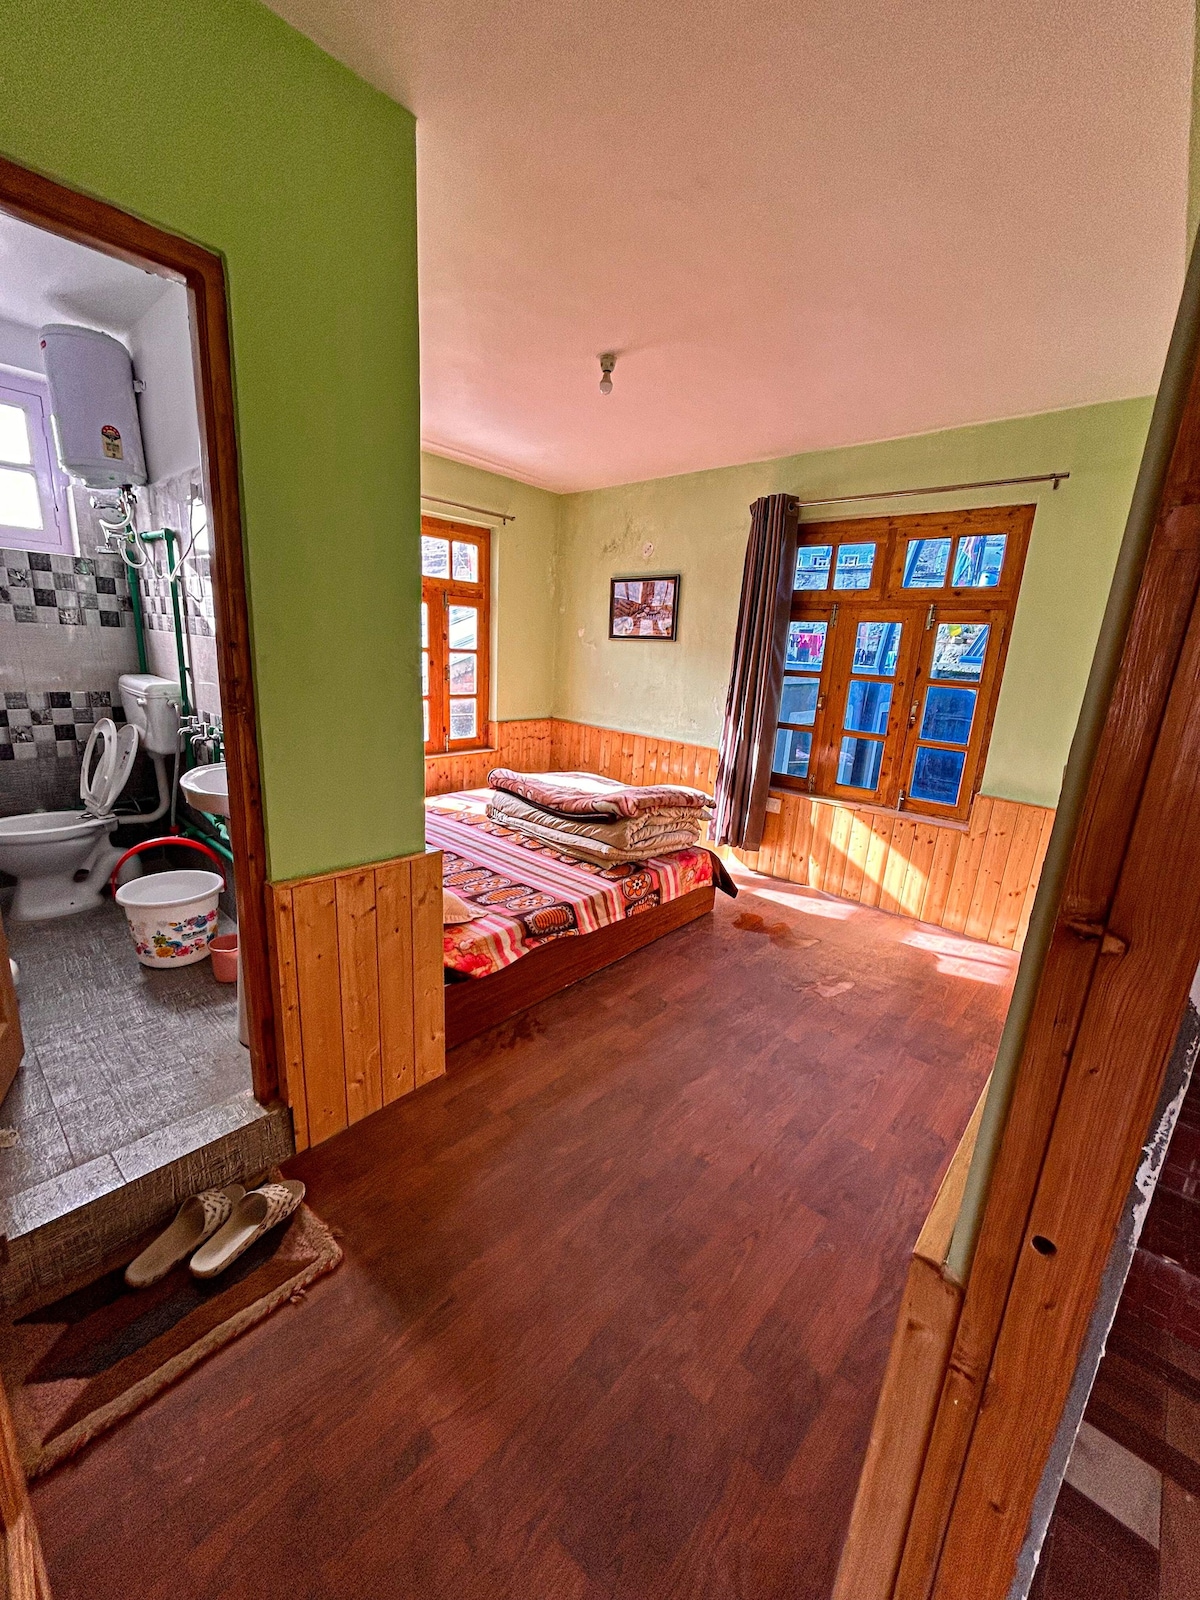 Hamlet wood
Homestay | 
A Panoramic perfection